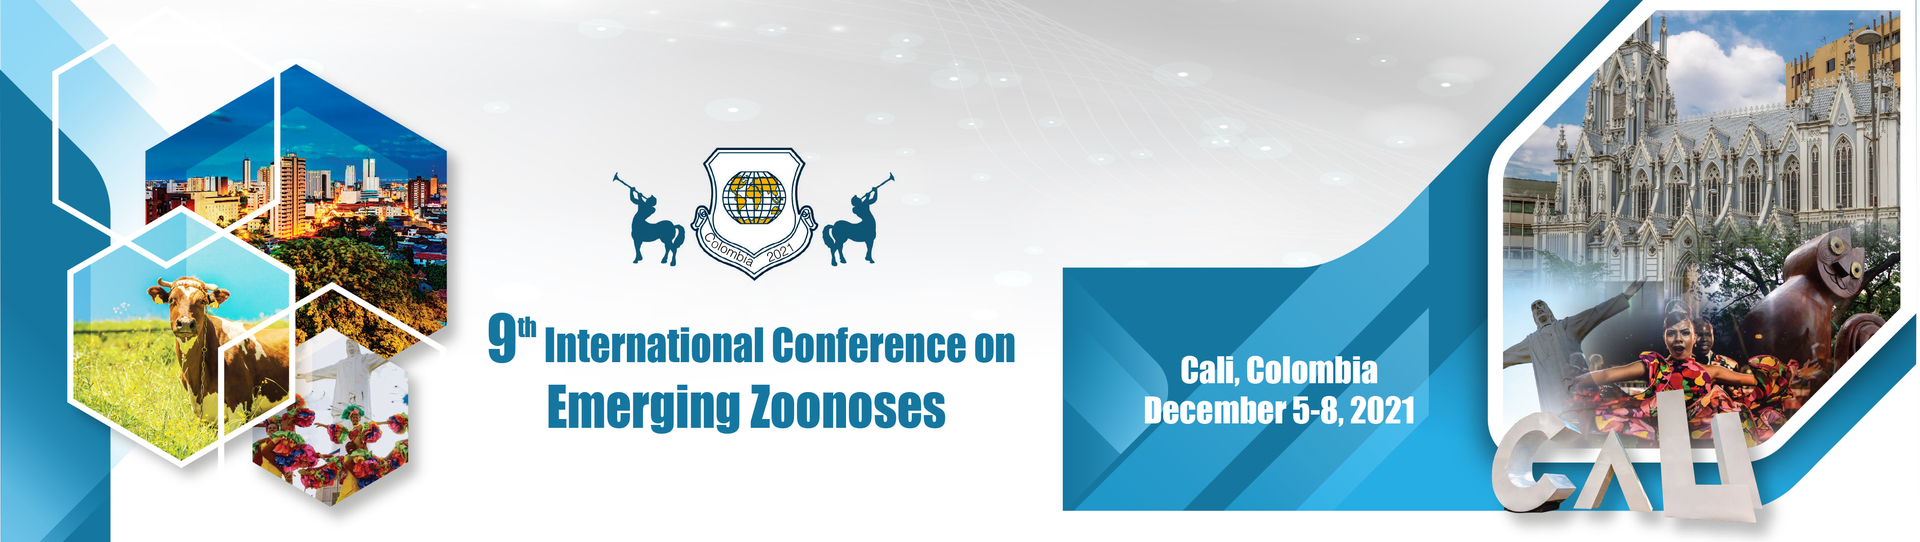 9th International Conference on Emerging Zoonoses 2021 (ZOO), Cali, Valle del Cauca, Colombia